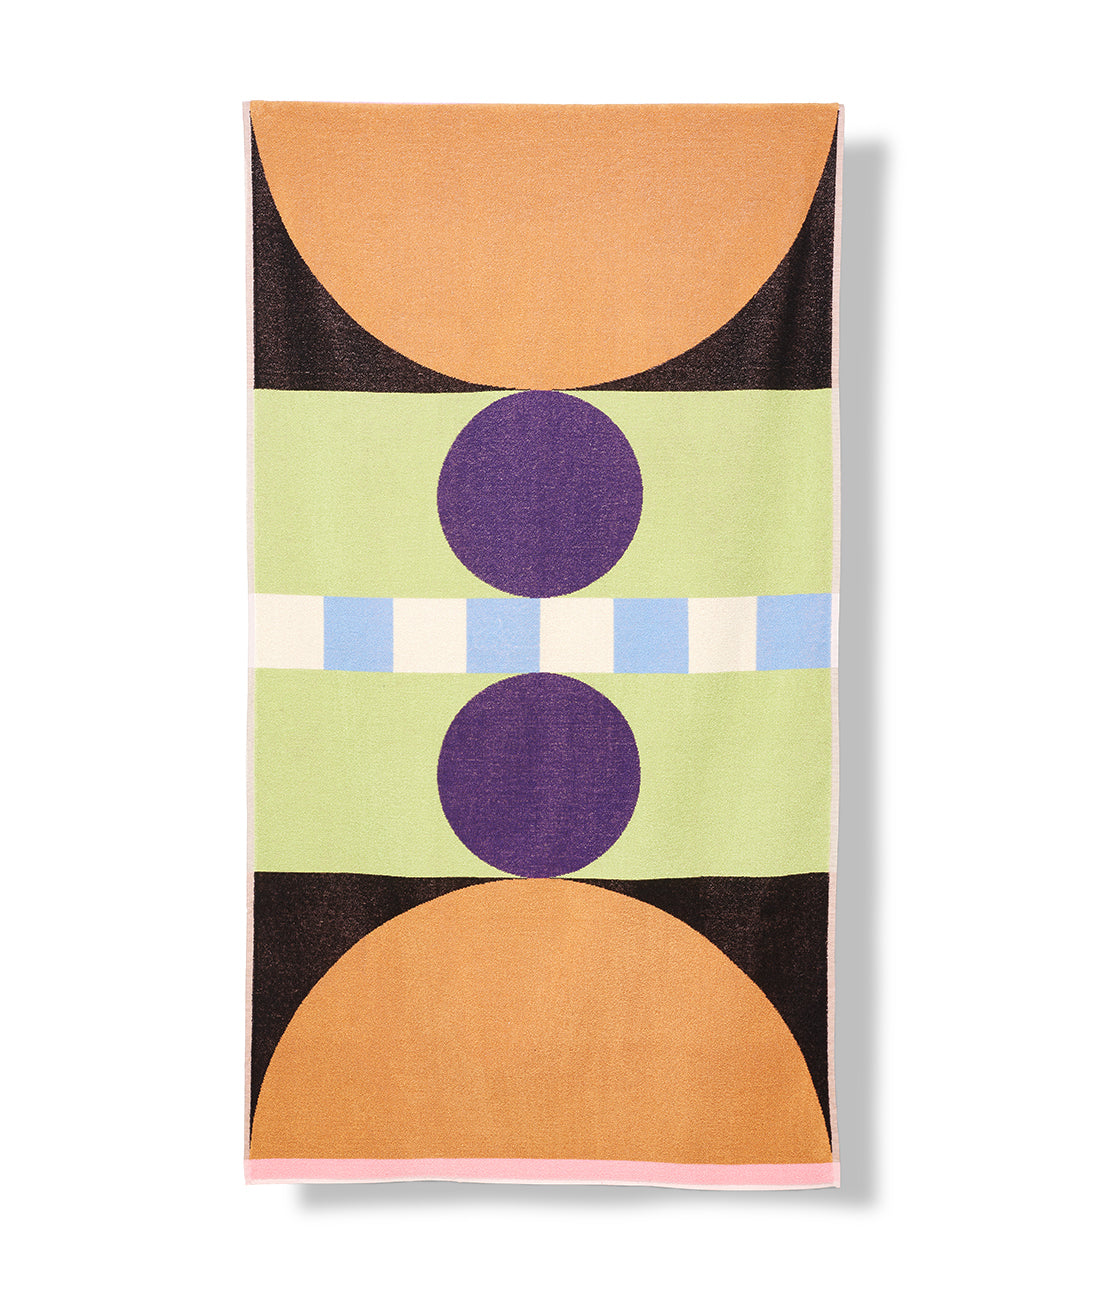 Terry Beach Towel "Coctail" by Sophie Probst 01